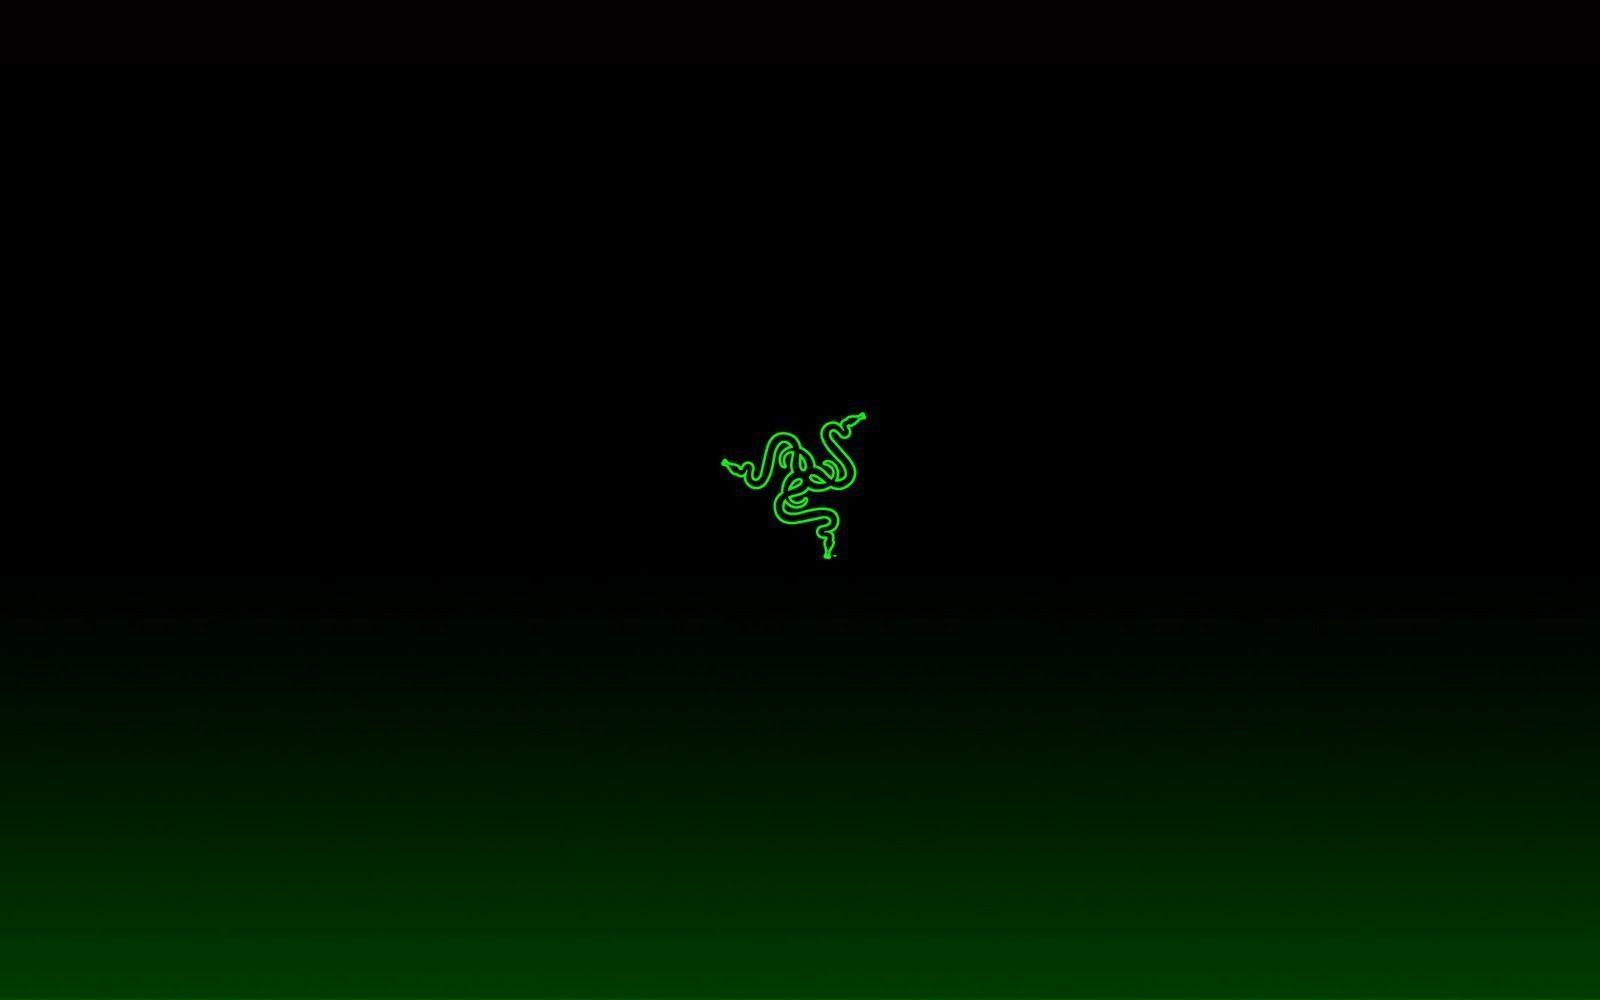 Wallpapers For > Razer Wallpapers 1920x1080